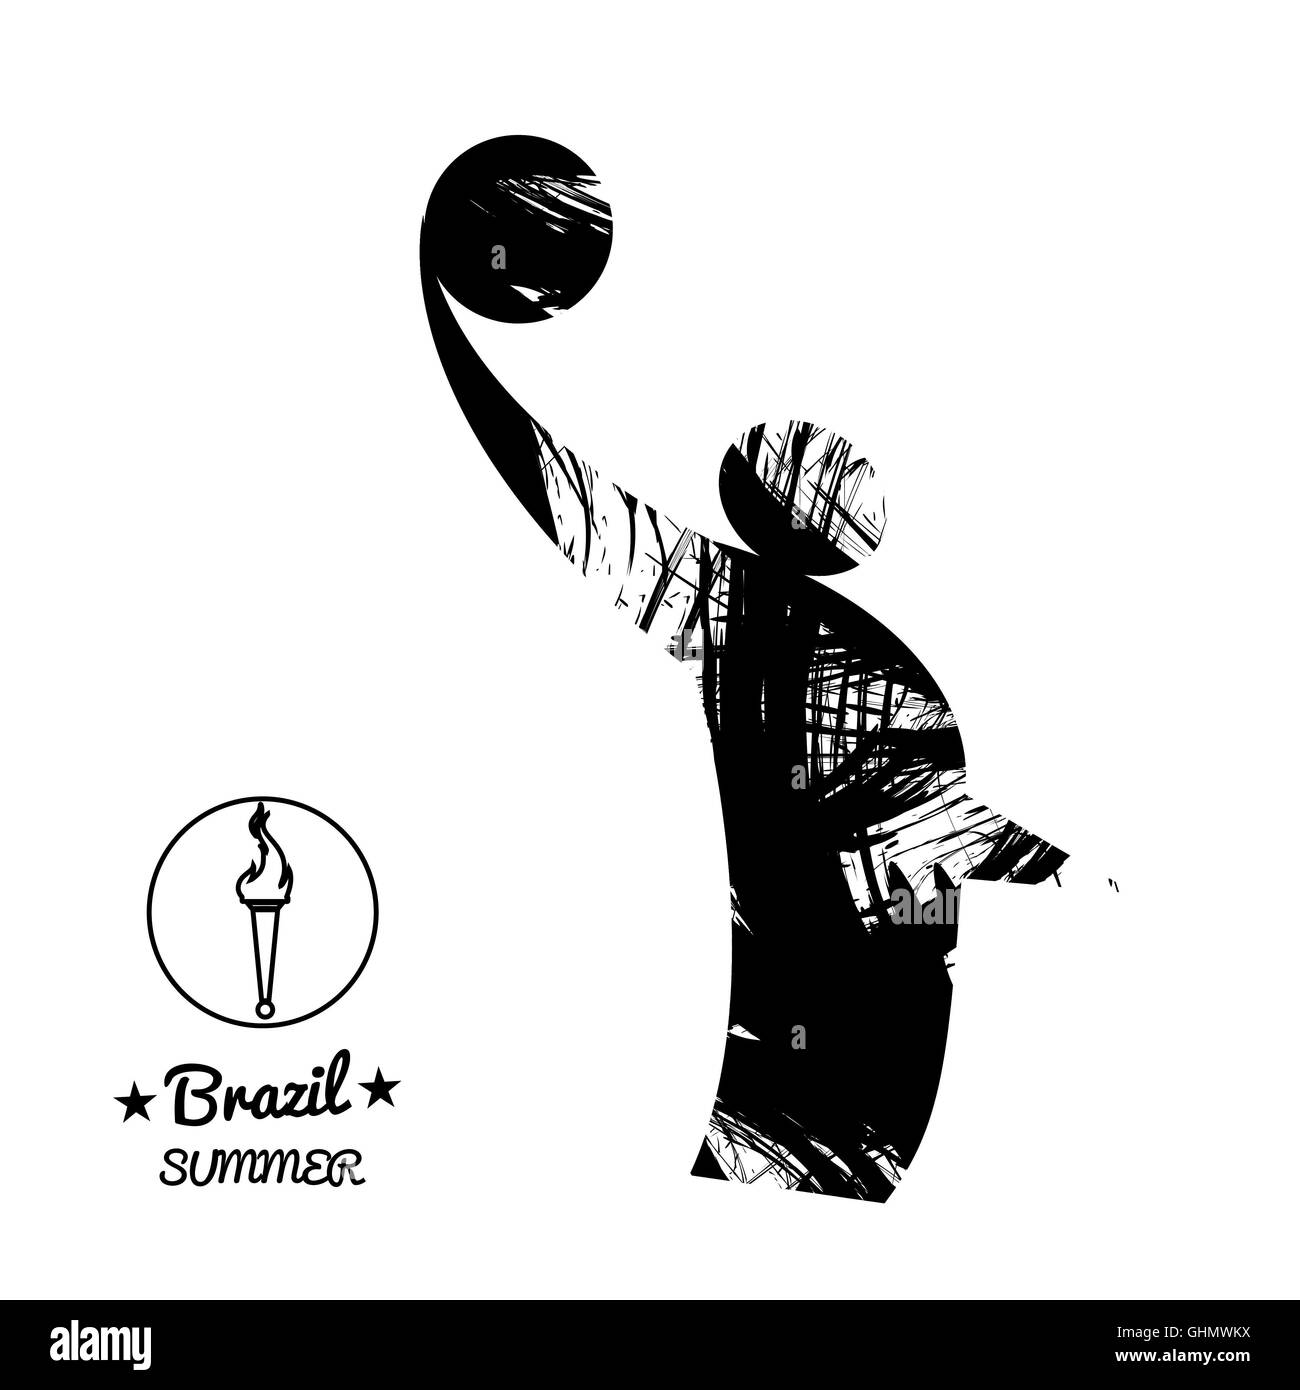 Brazil summer sport card with an abstract volley player jumping, in black outlines. Digital vector image Stock Photo